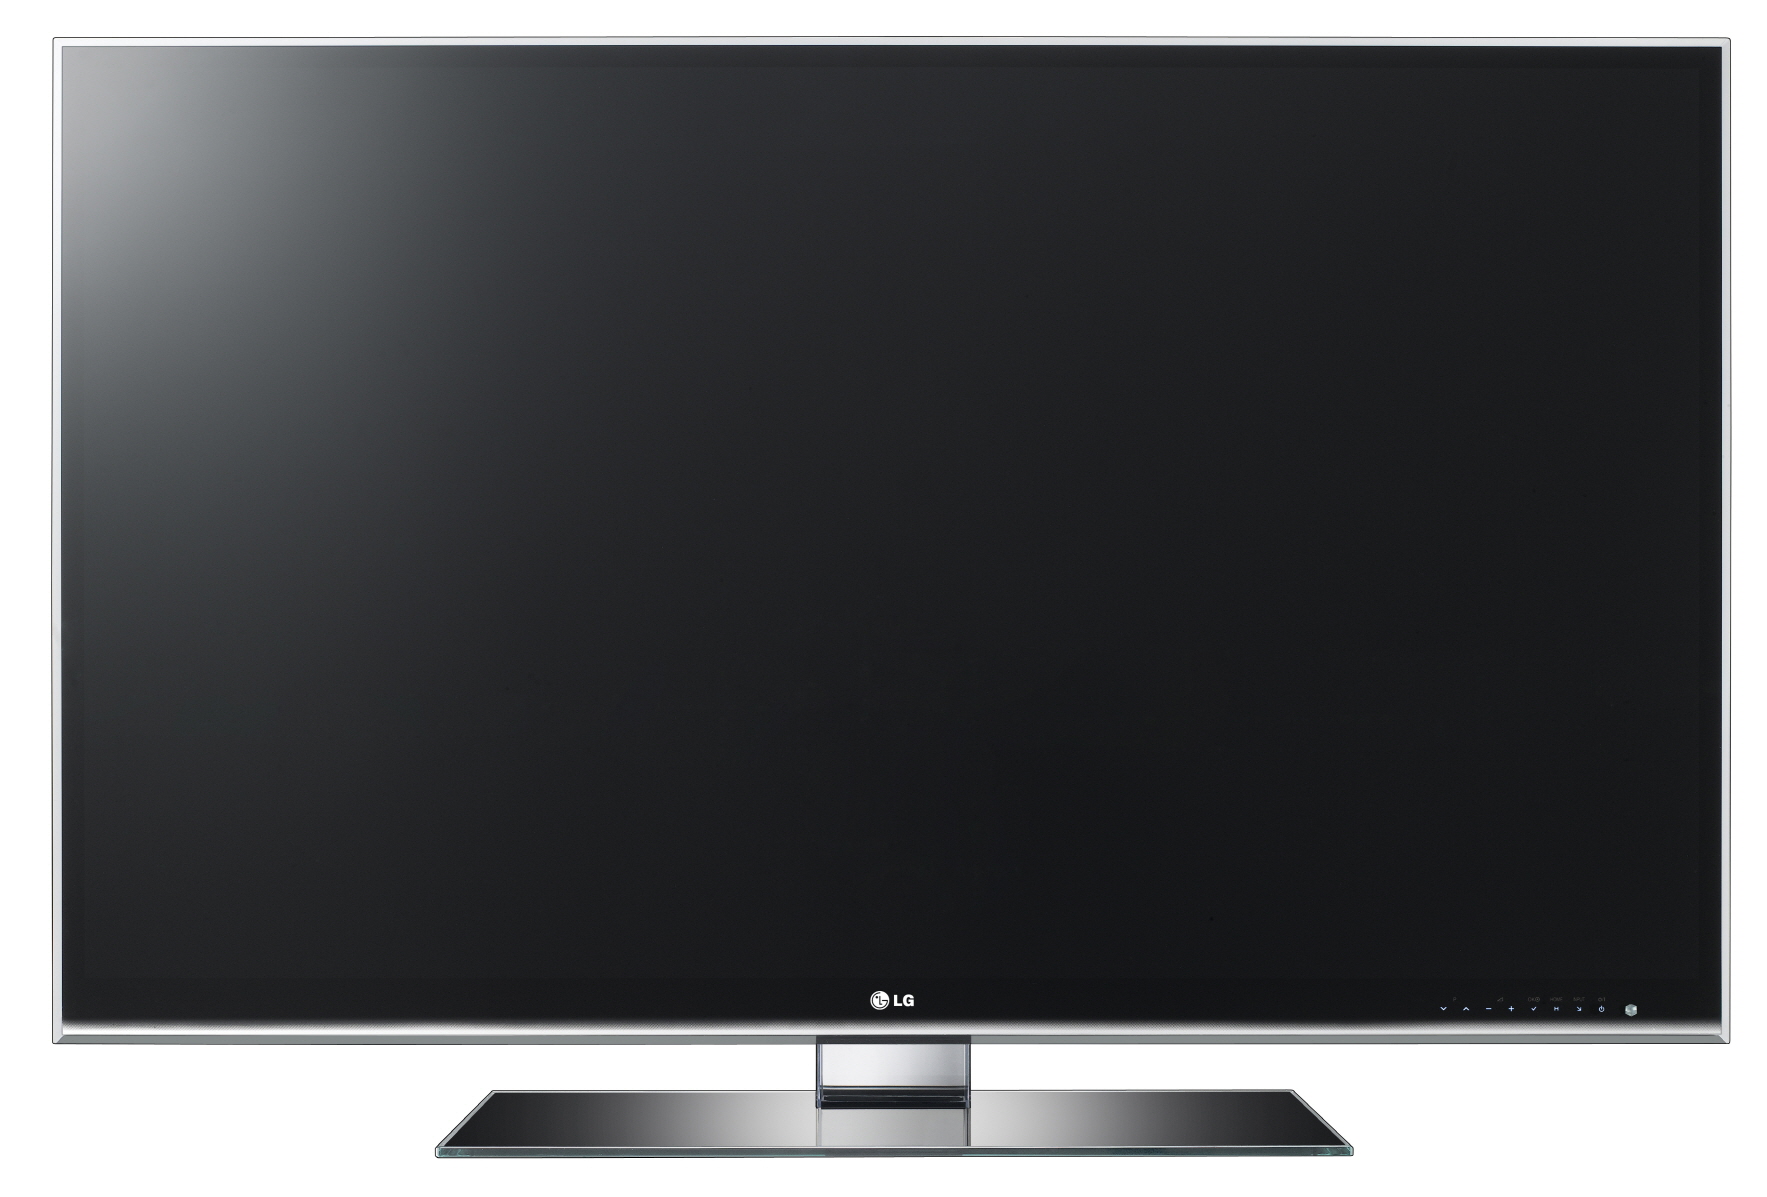 A front view of LG 3D TV model LW980S